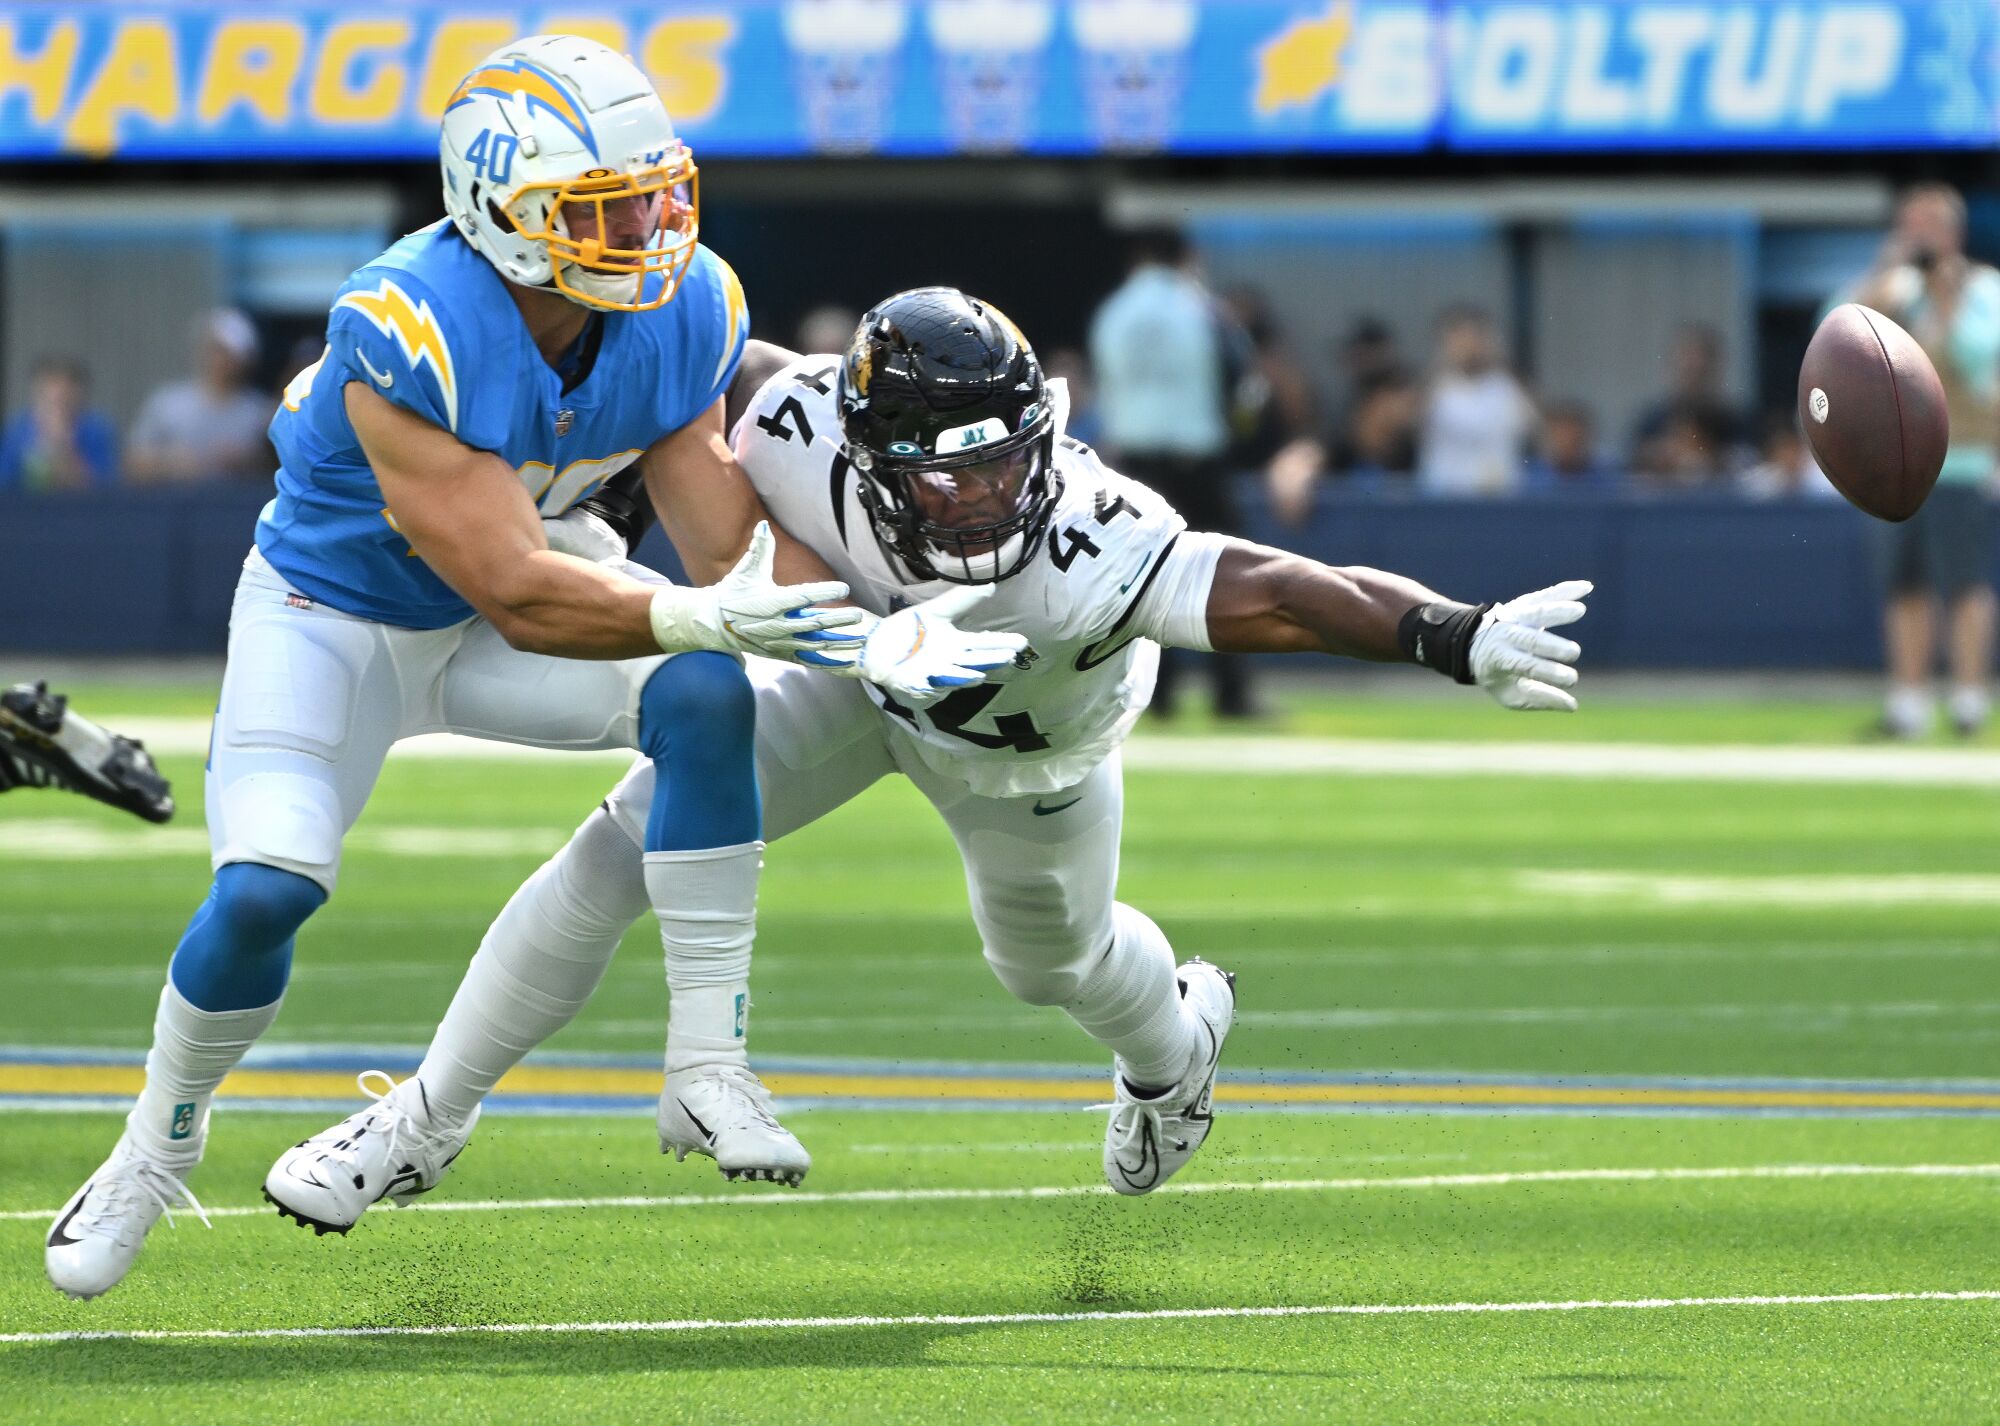 Jaguars linebacker Travon Walker breaks up a pass intended for Chargers fullback Zander Horvath.